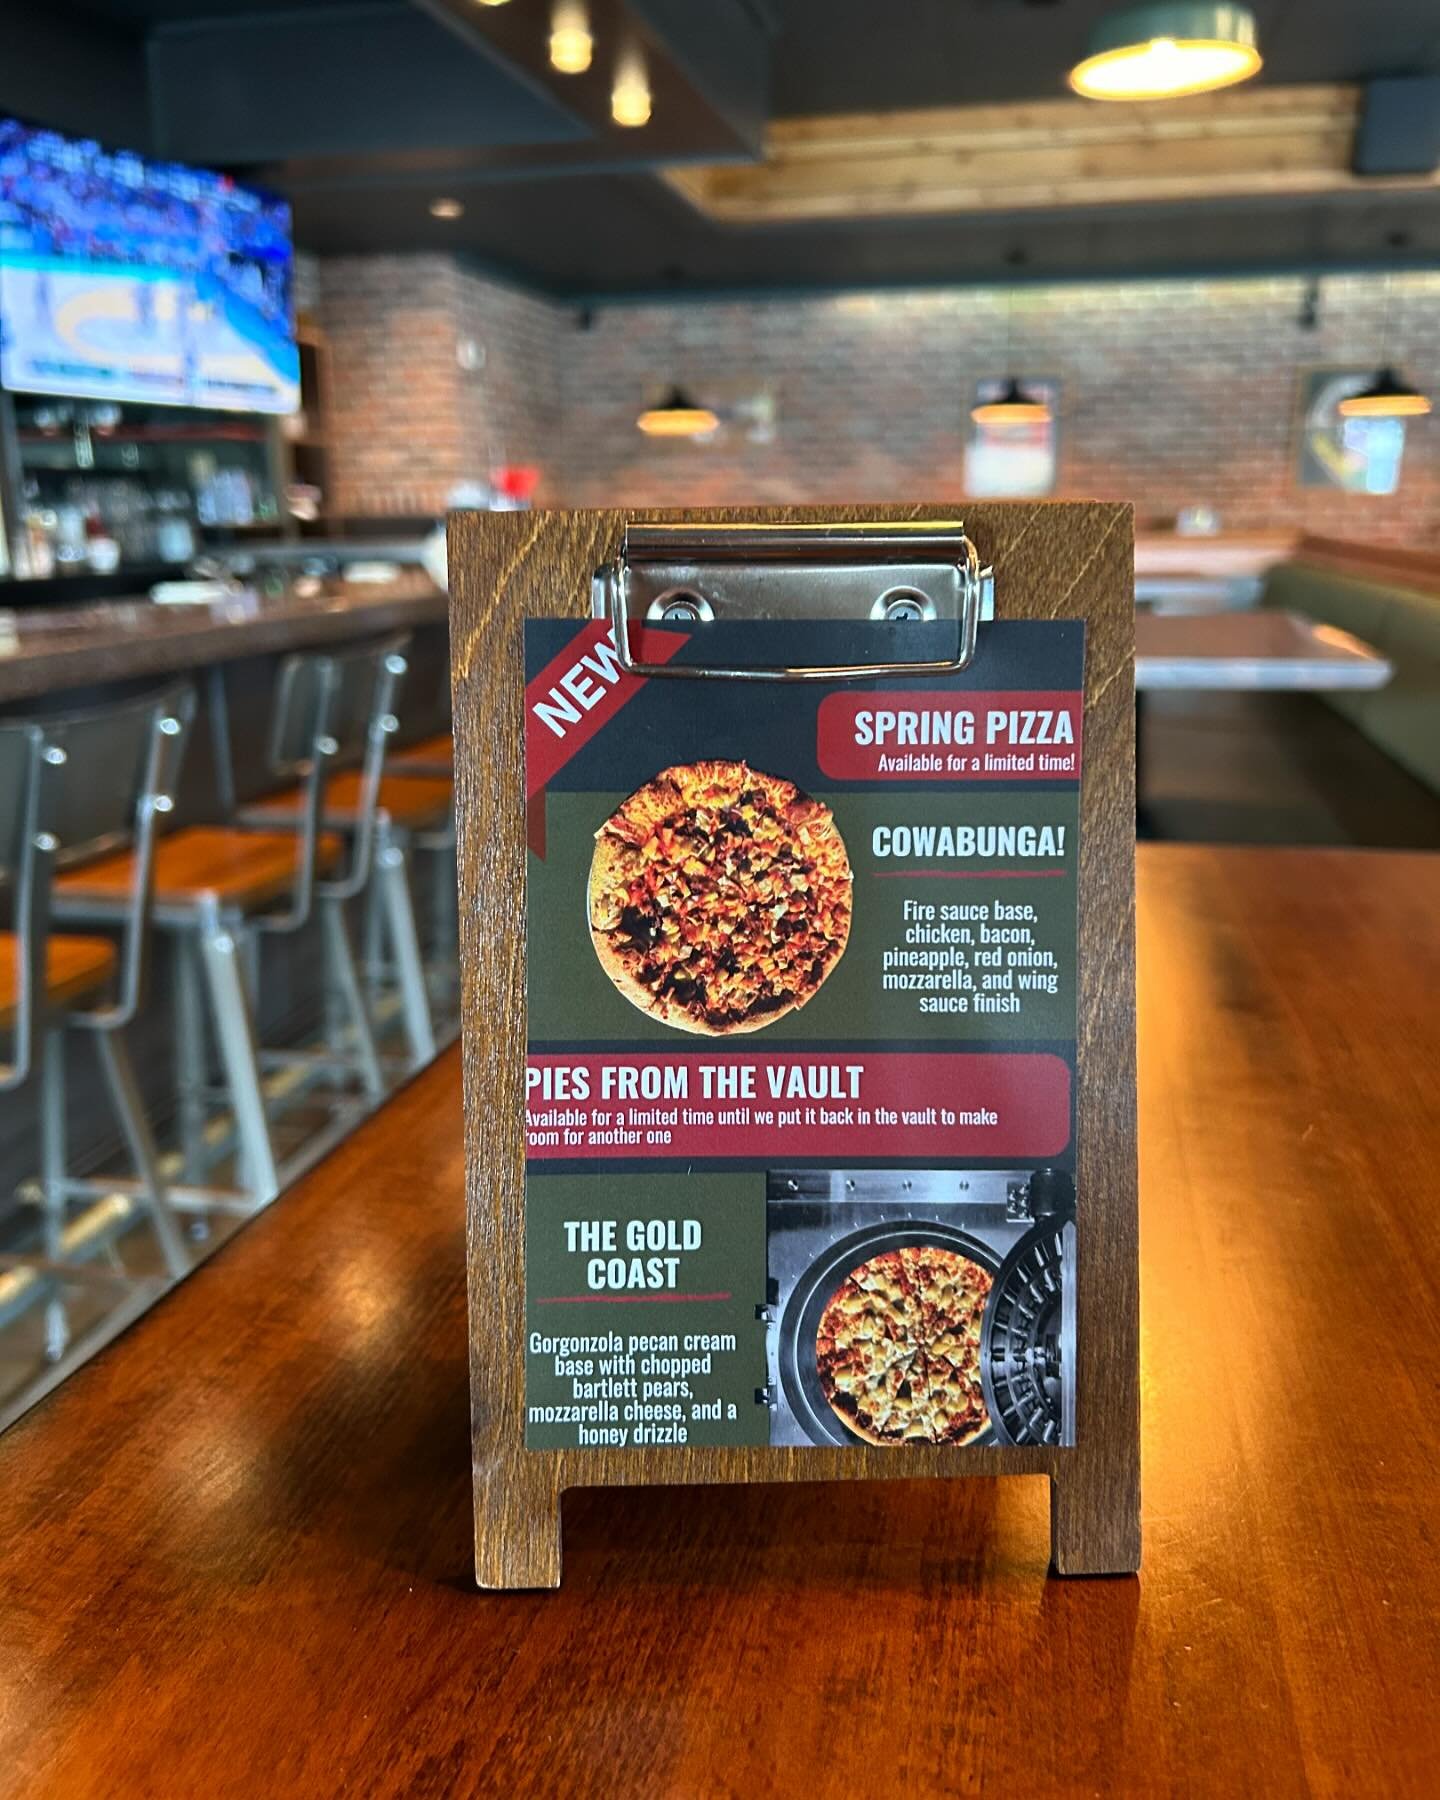 Last chance to indulge in our Spring pizza, The Cowabunga, and The Gold Coast before we put them in the vault to make room for a very special new pizza that will quite literally make your taste buds dance! Both pizzas will leave our menus 5/22! Hurry